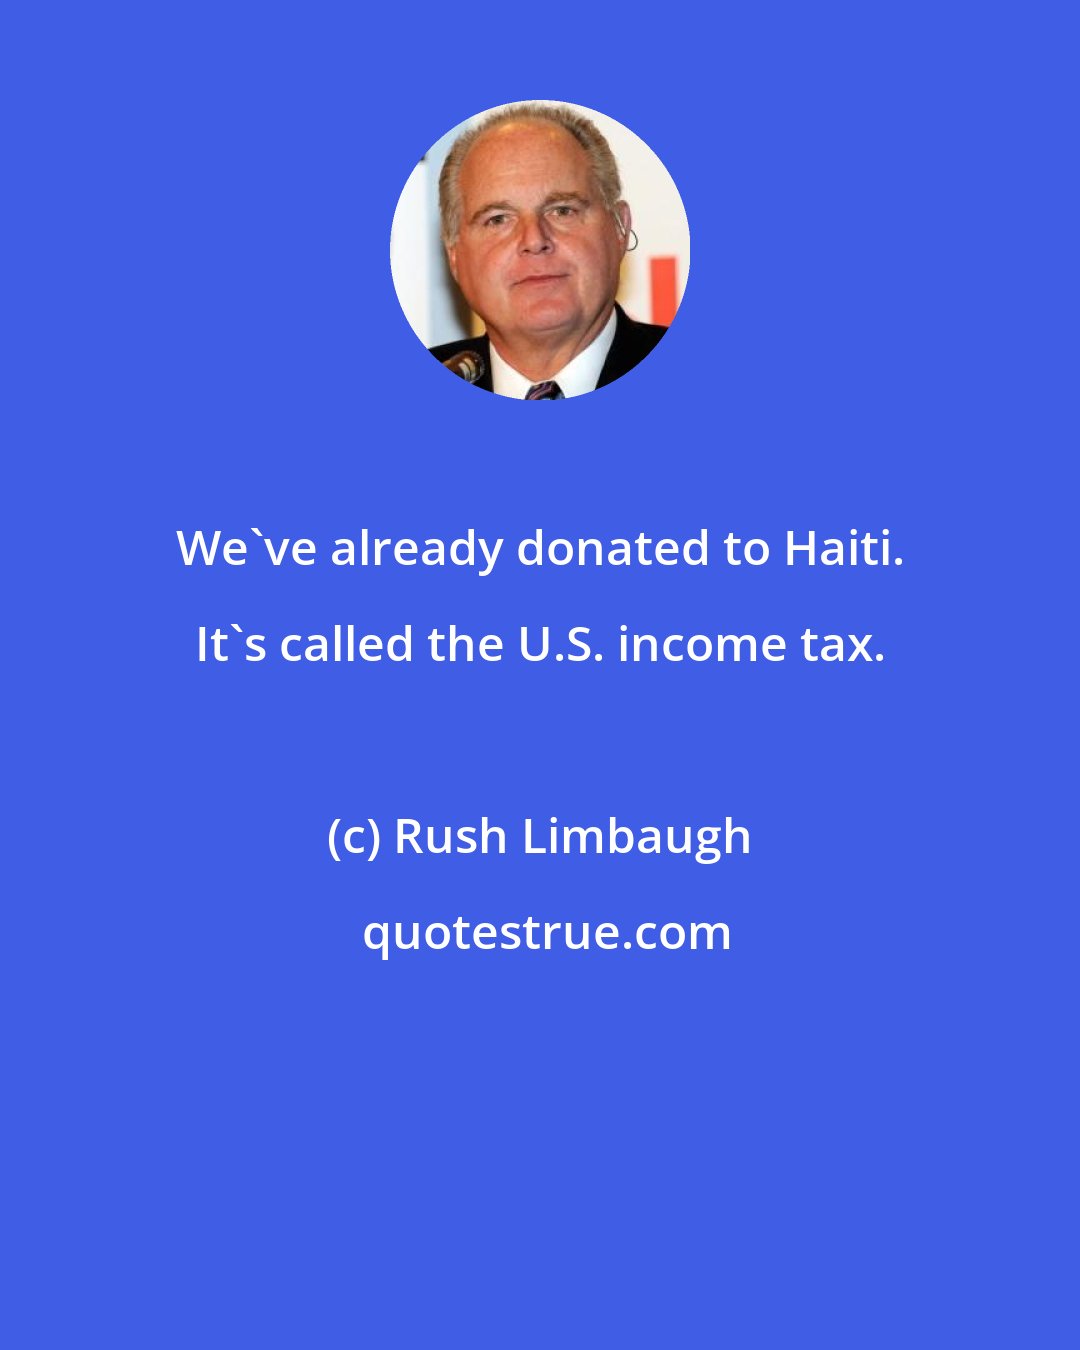 Rush Limbaugh: We've already donated to Haiti. It's called the U.S. income tax.